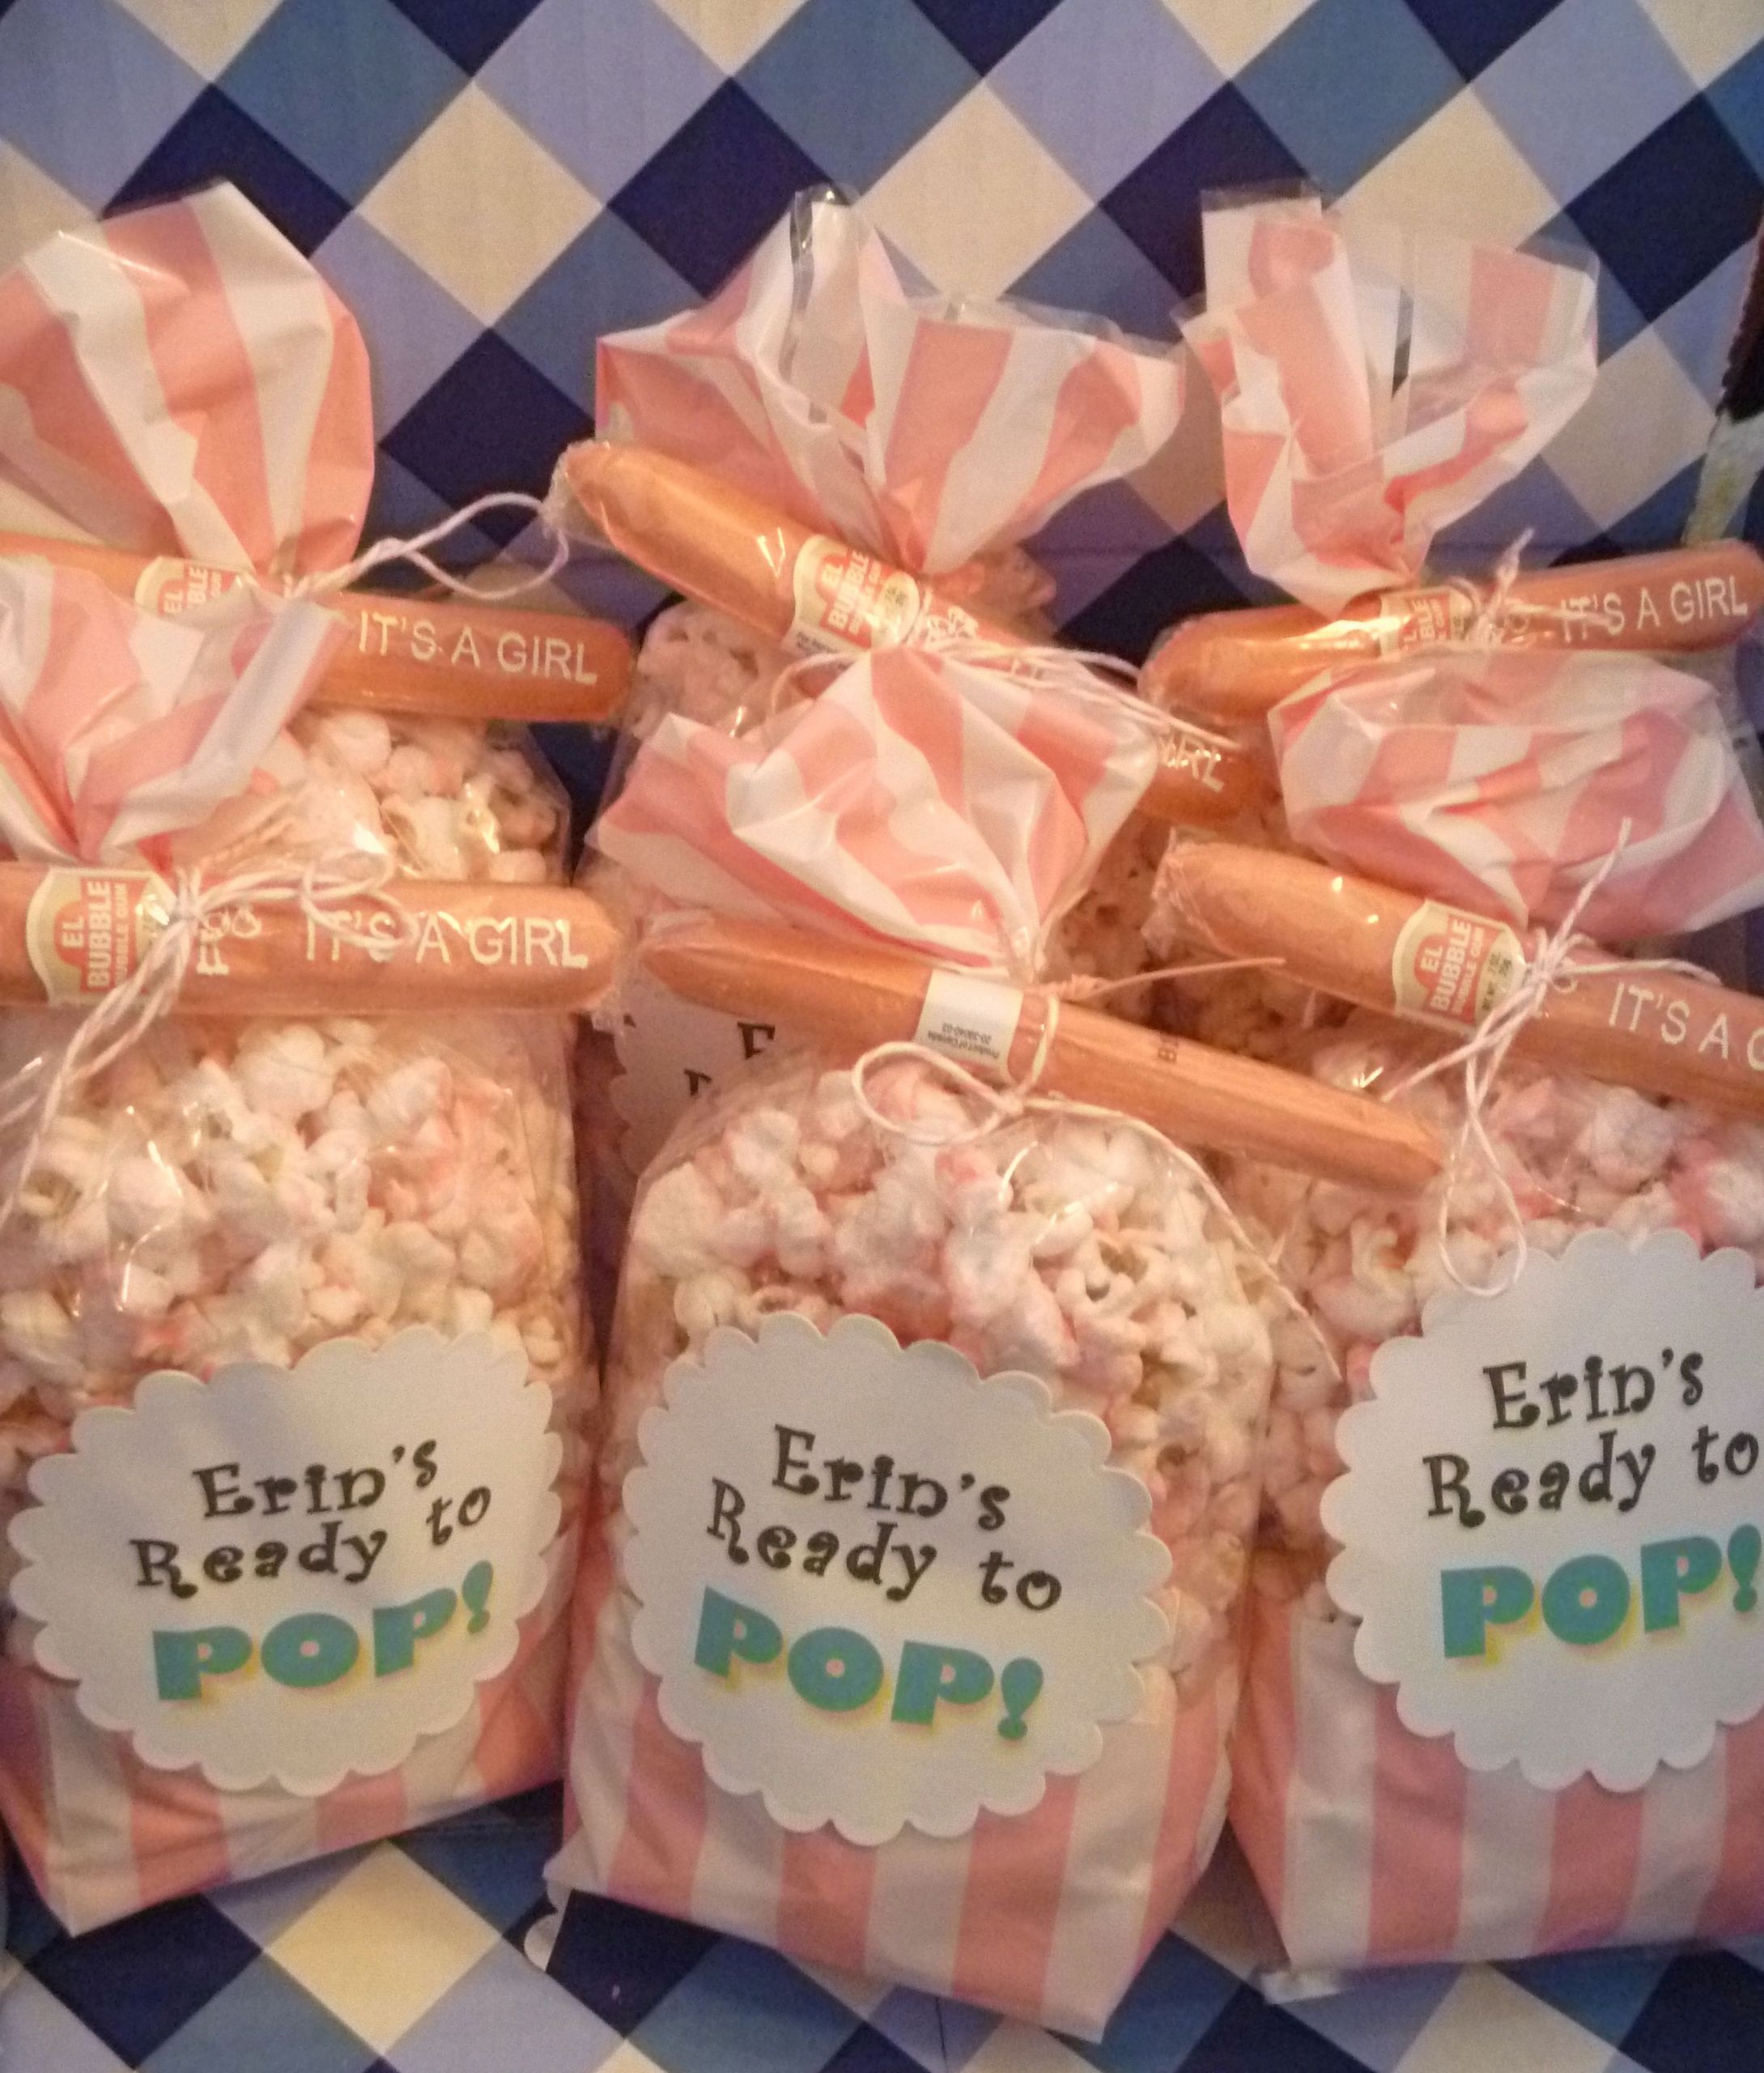 Party Favor Ideas For Baby Shower
 Salty Sweet Delicious “Ready to Pop” Popcorn – Baby Shower